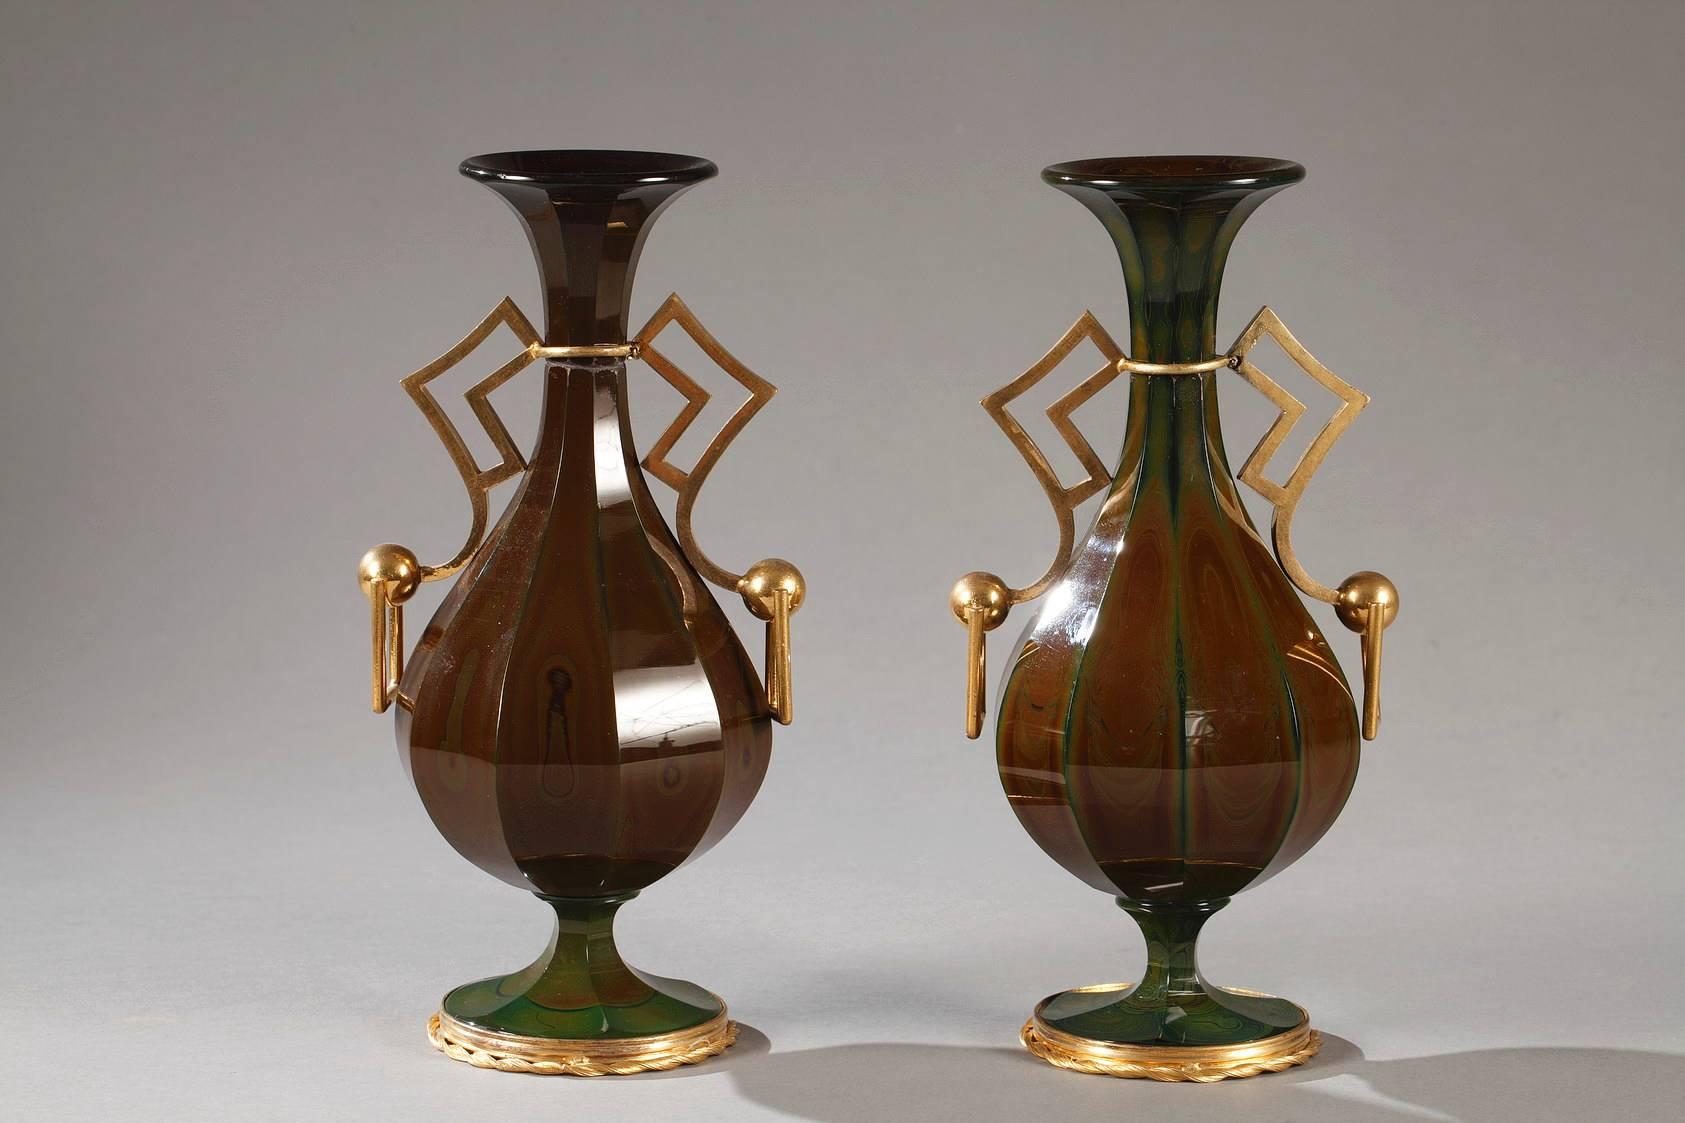 Rare pair of vases in Bohemian lithyalin glass featuring angled sections and gilt bronze mounts. Each of the dark green and marbled vases rests on a pedestal base encircled by a gilt bronze spiraling ribbon. The simple yet elegant angular handles